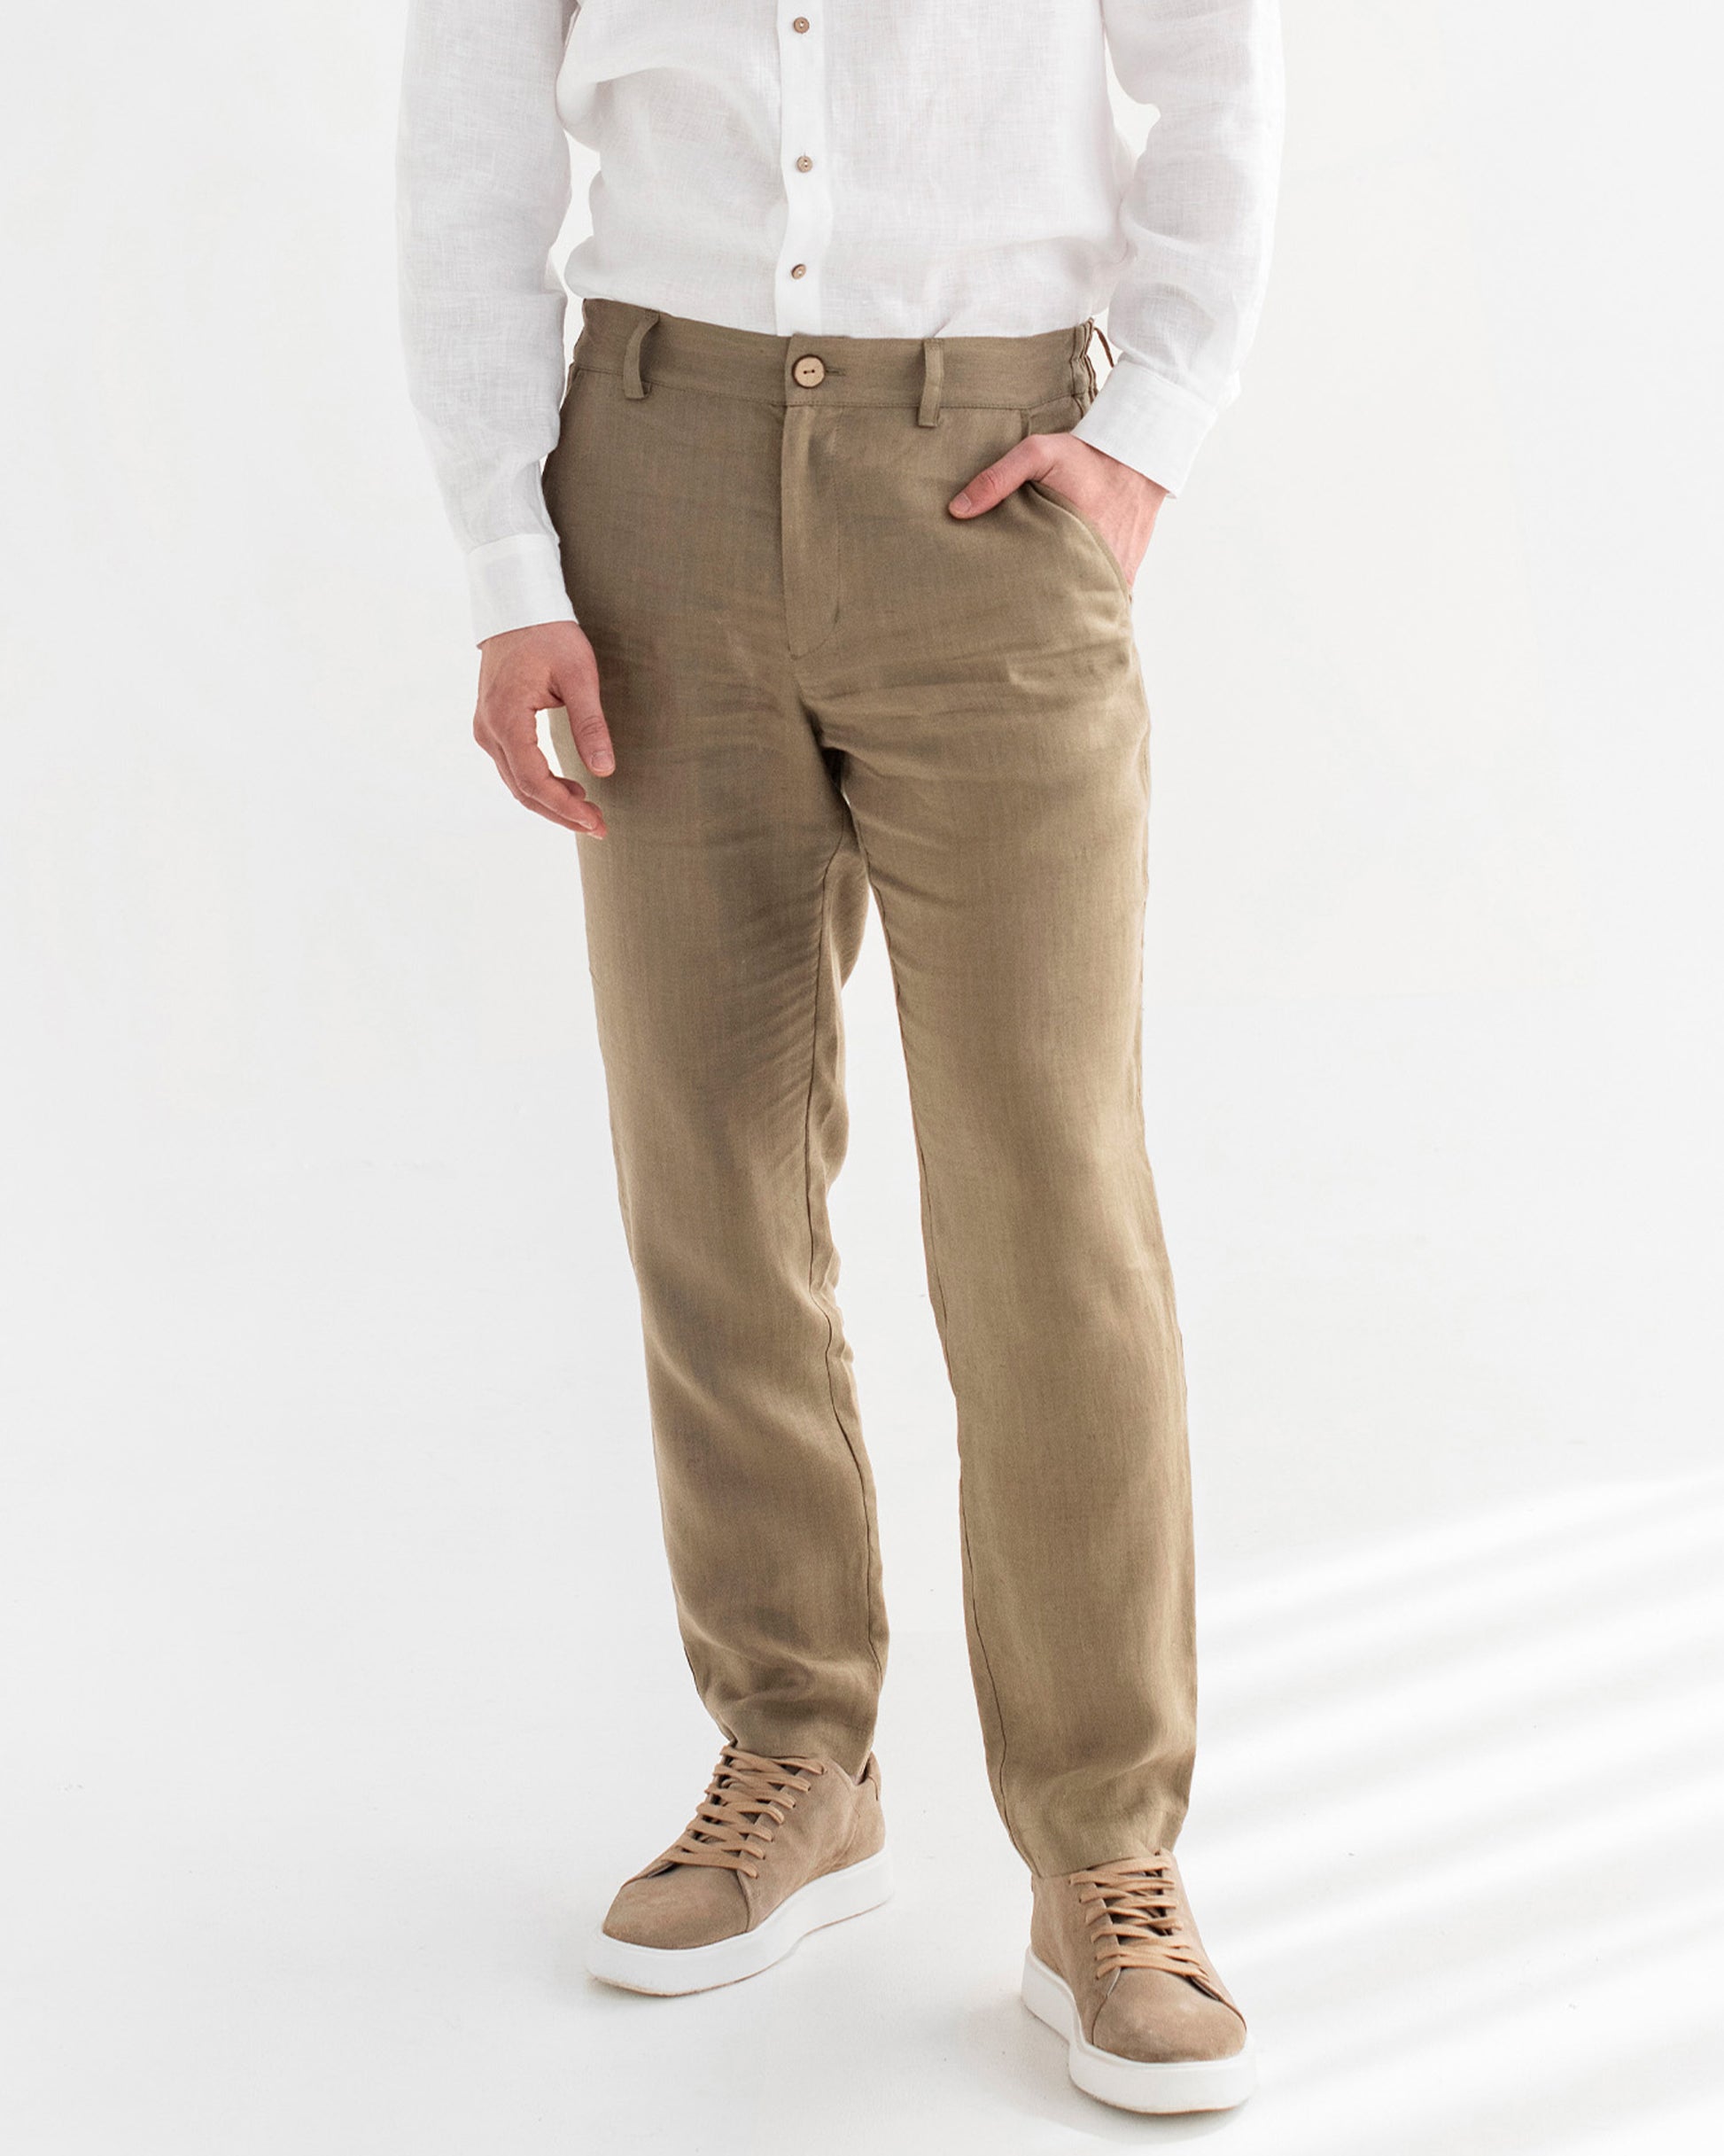 White Linen Shirt with Brown Linen Pants